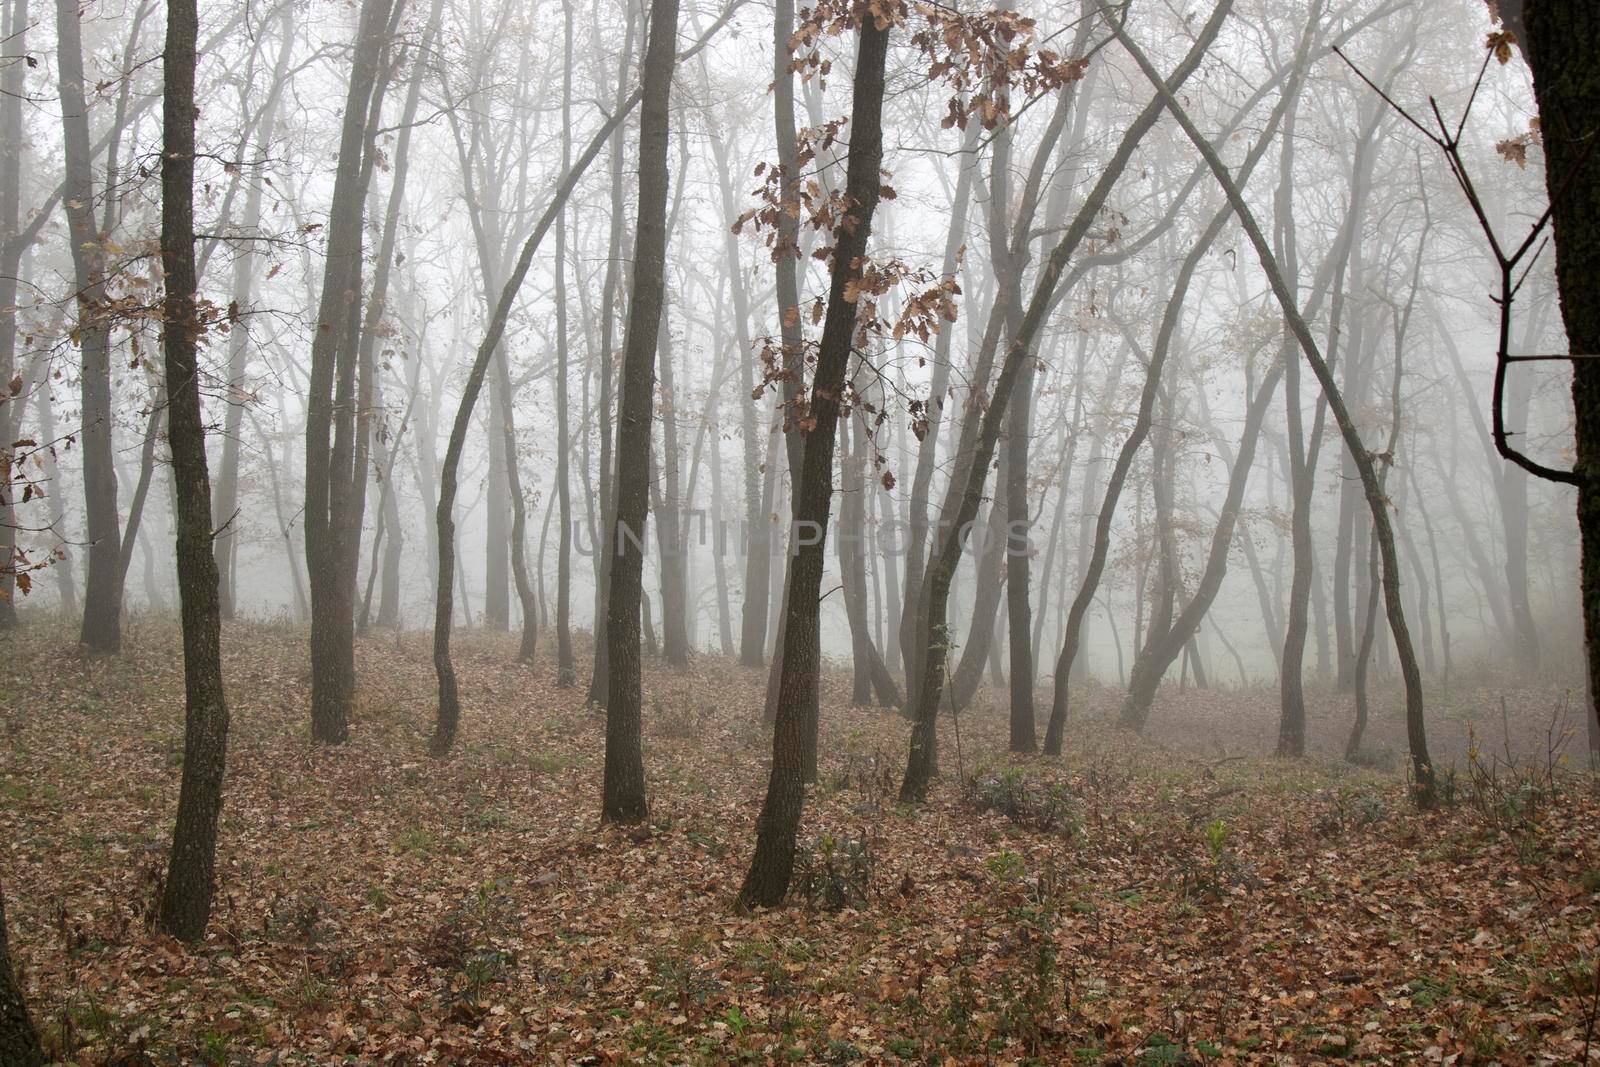 Foggy beautiful landscape showing some trees and leaves in autumn